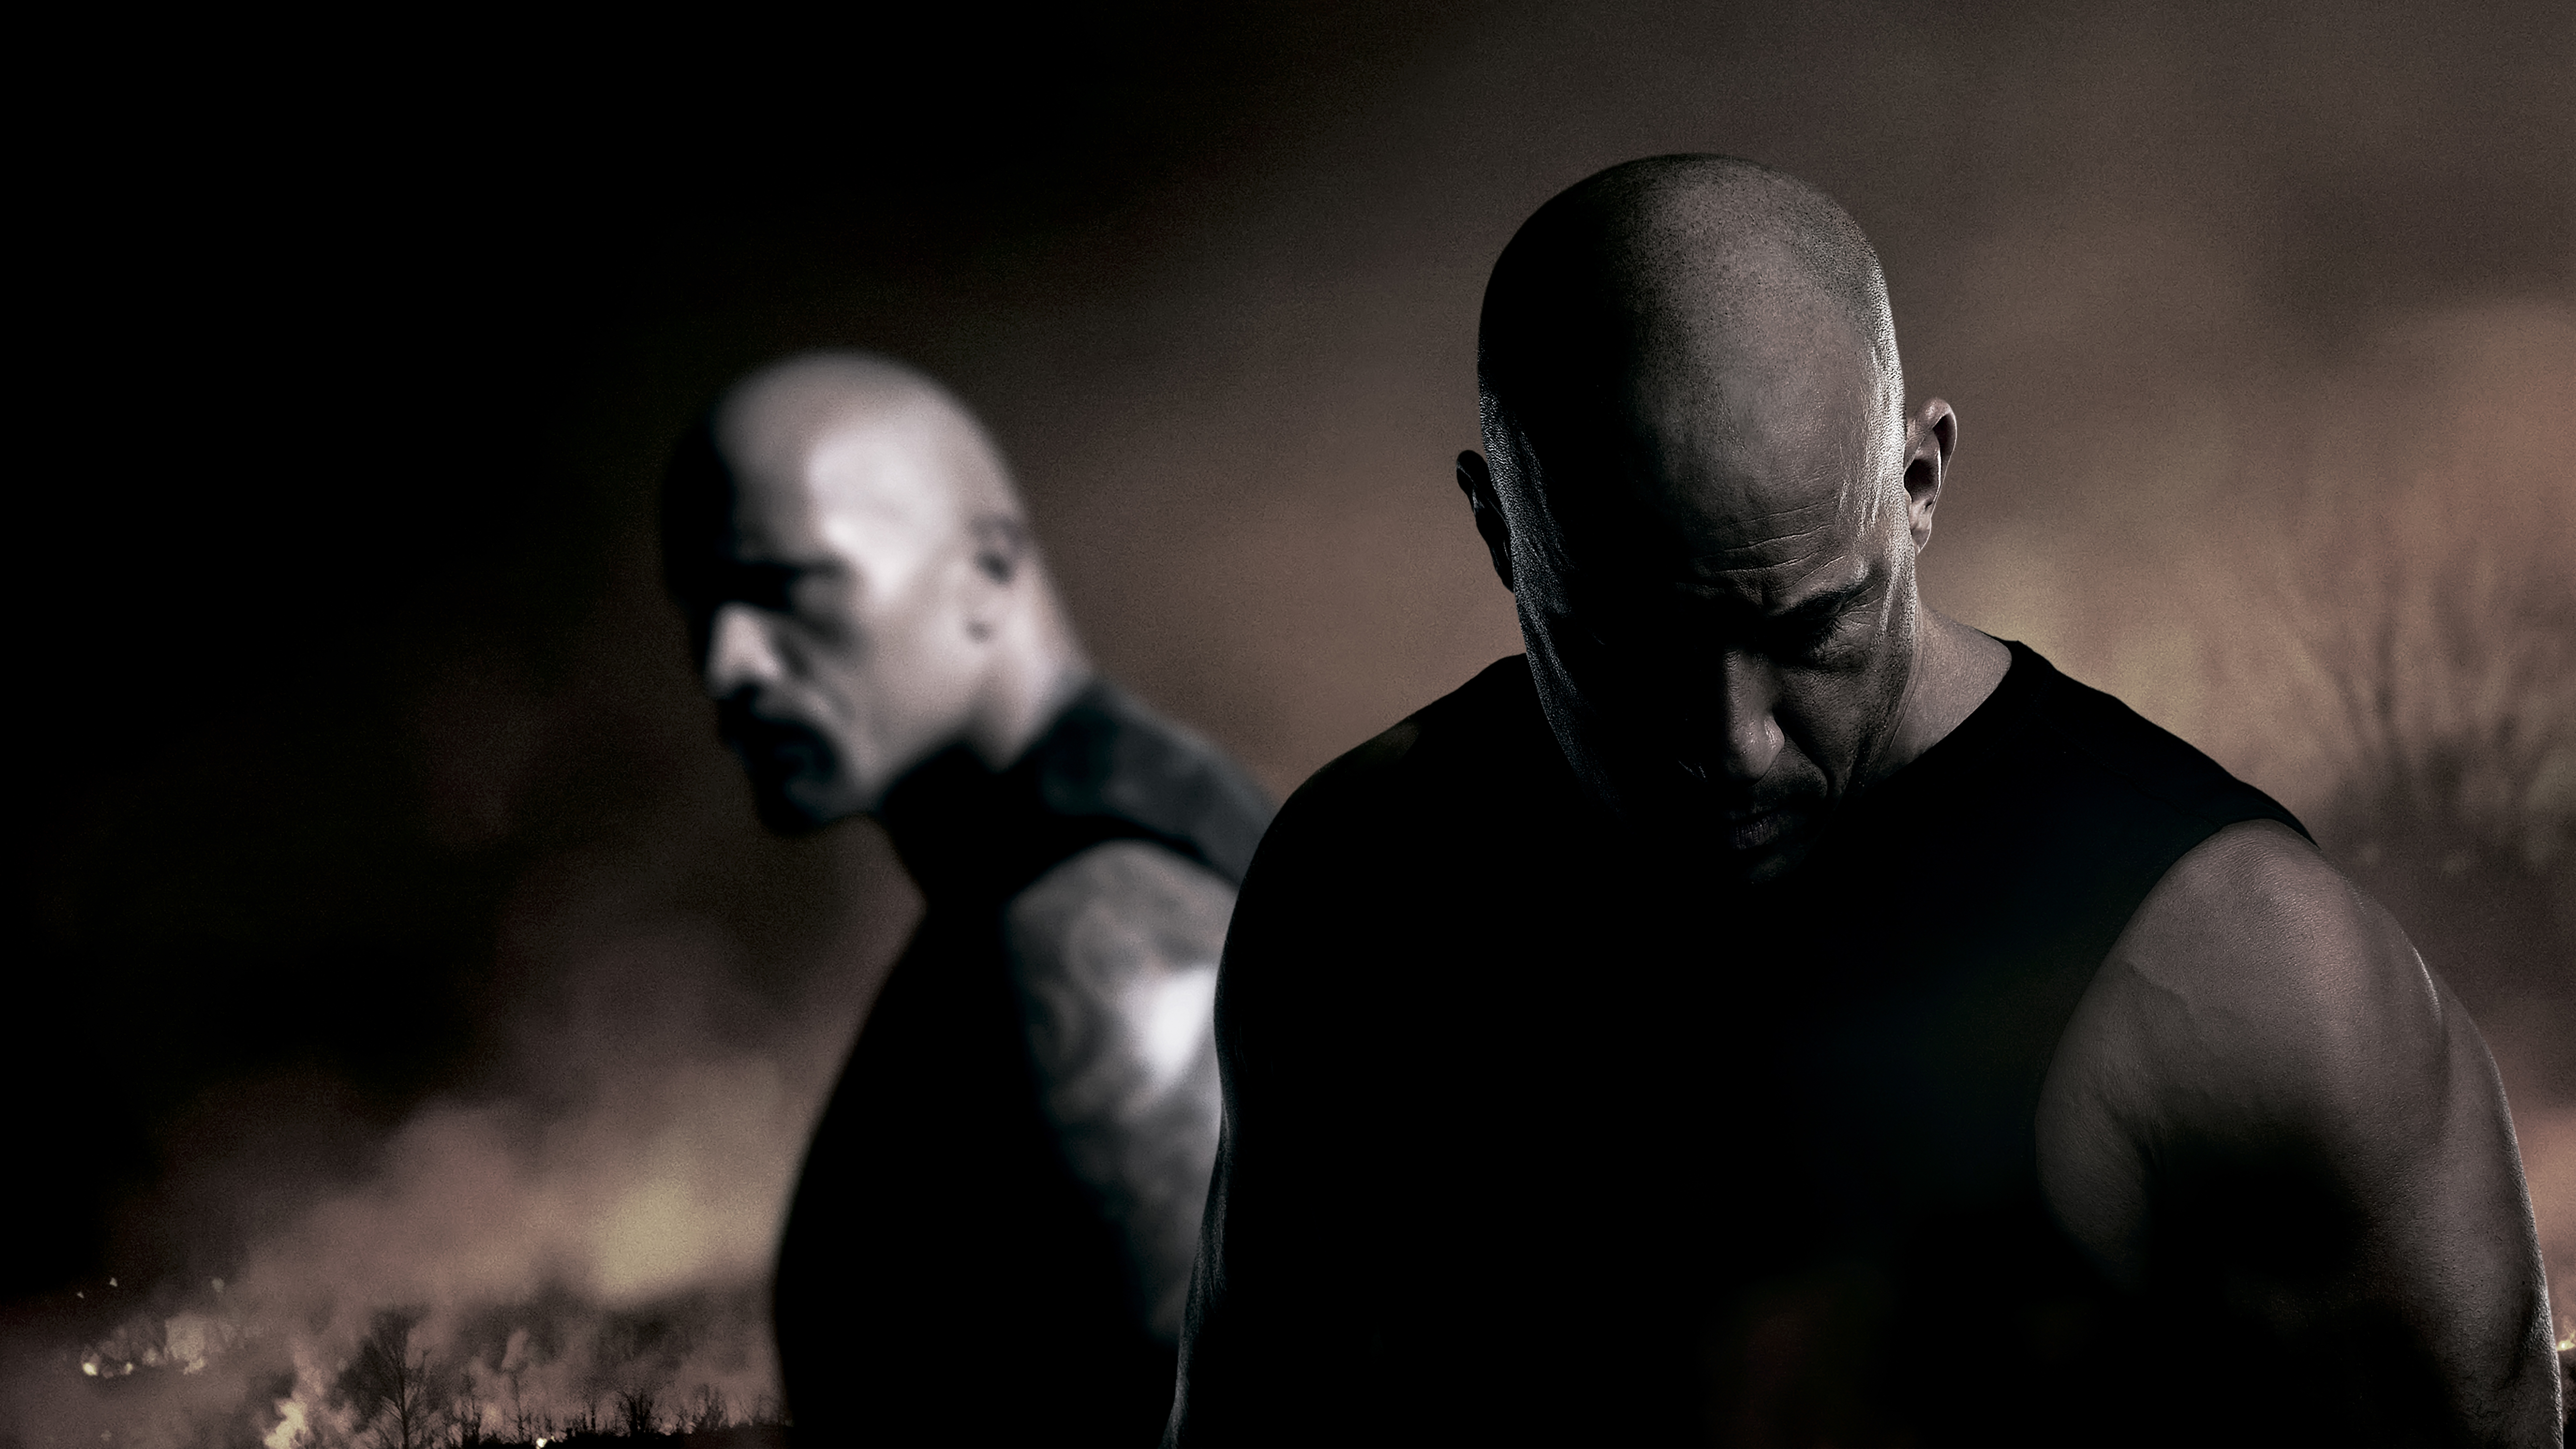 Movie The Fate of The Furious HD Wallpaper | Background Image